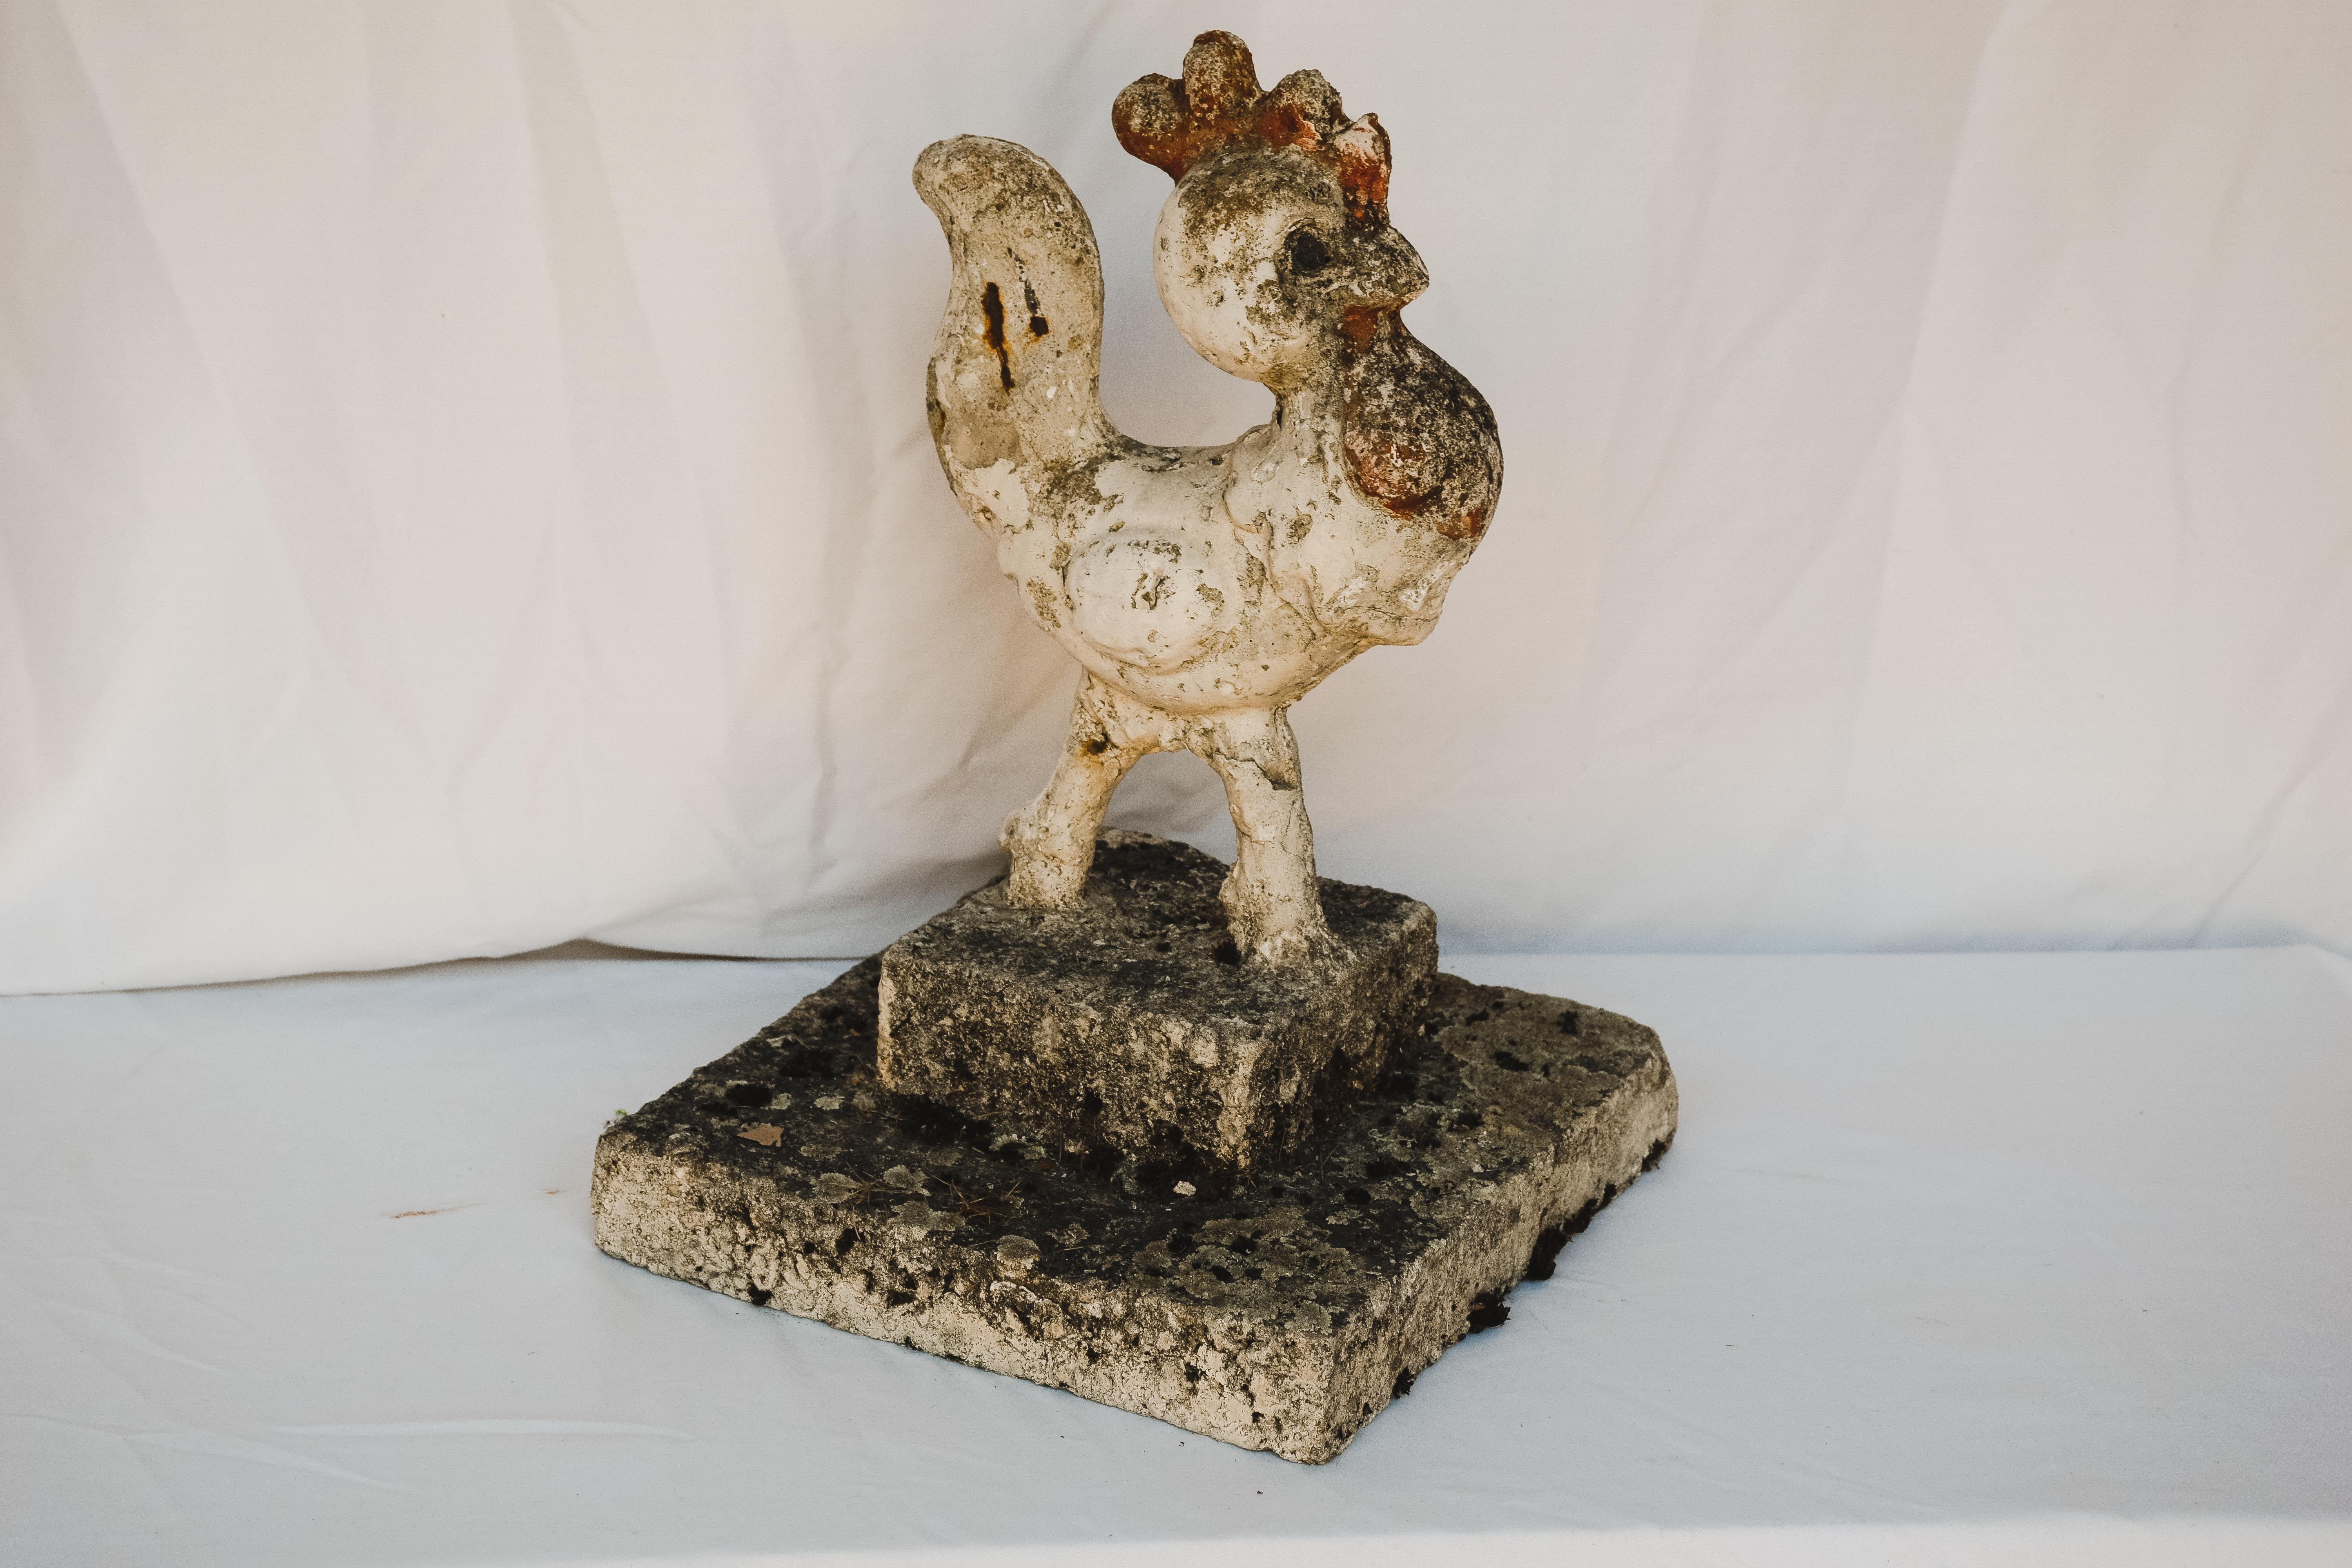 Mid-20th century concrete garden rooster. This garden element has an amazing time worn patina. Could be placed on a patio or in the garden. But honestly so incredible indoors. Great Conversations piece.